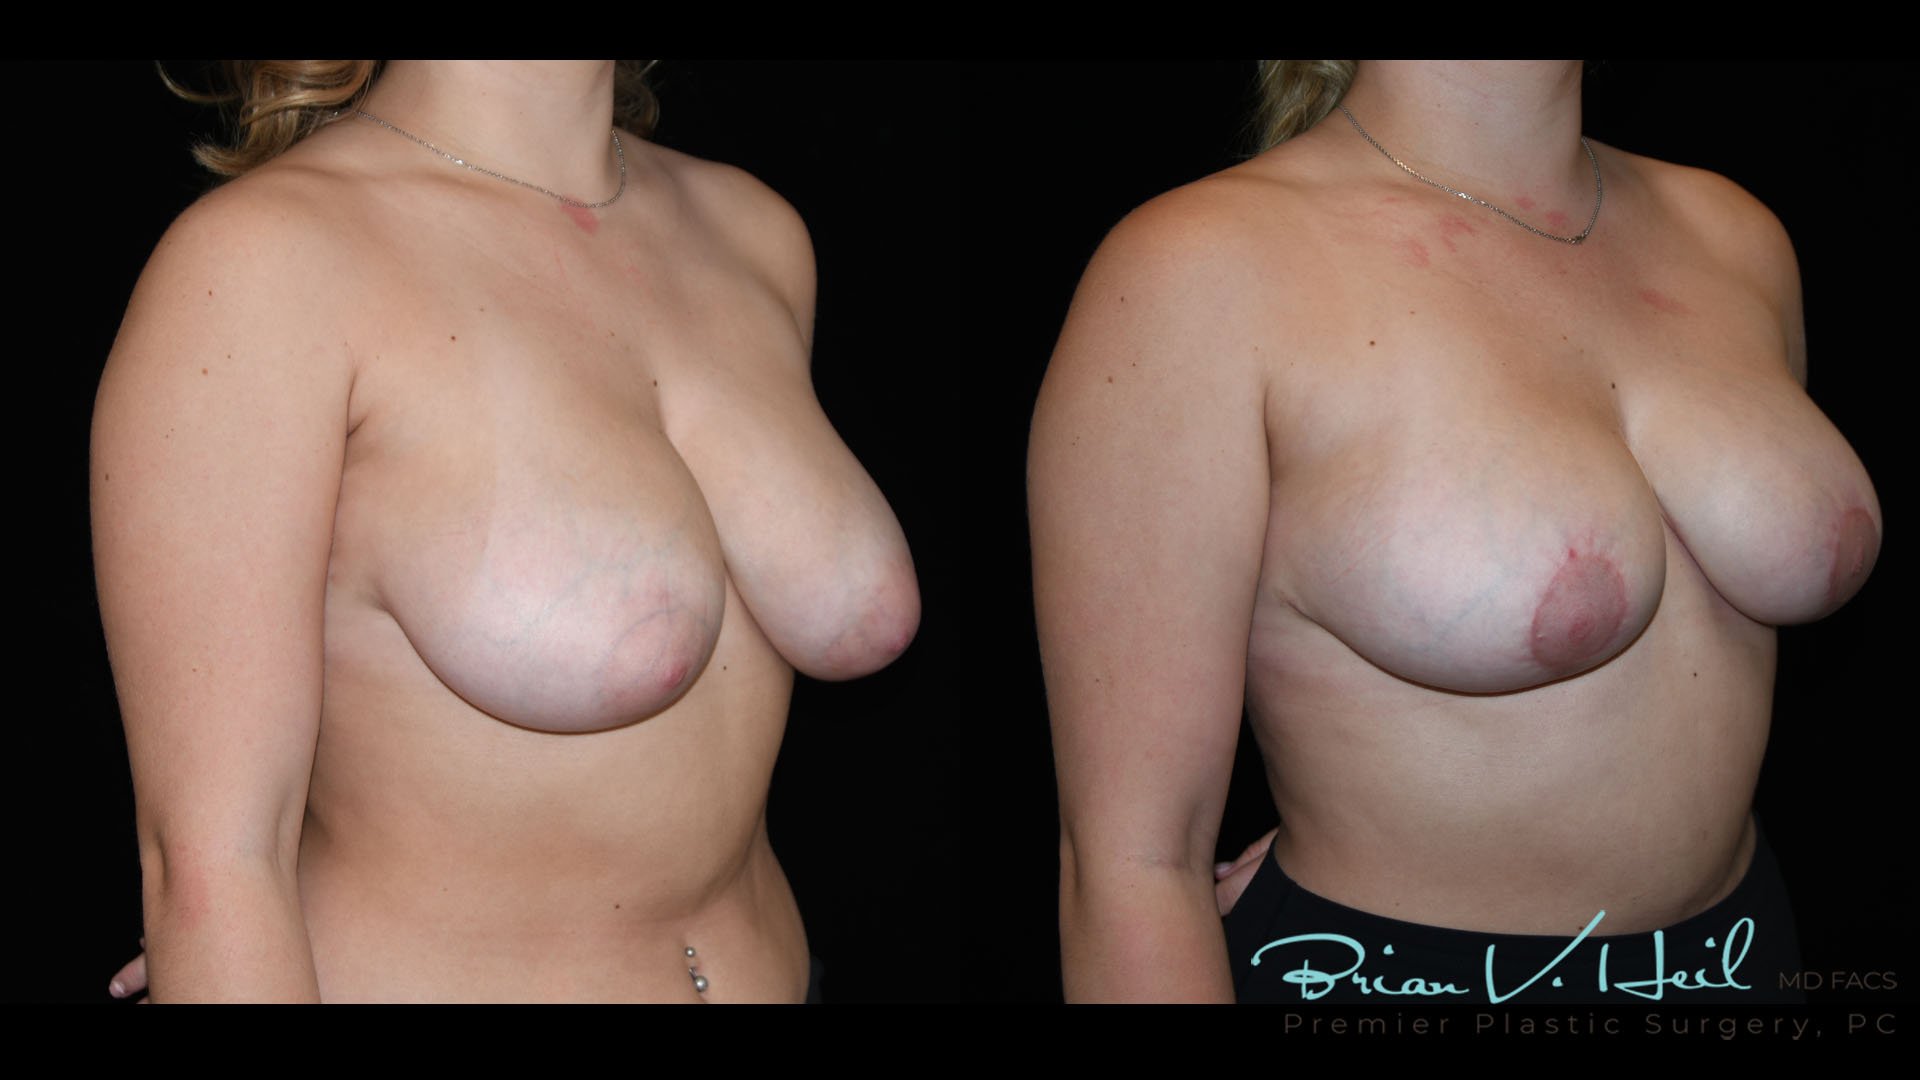 Breast Lift Surgery in Pittsburgh, PA